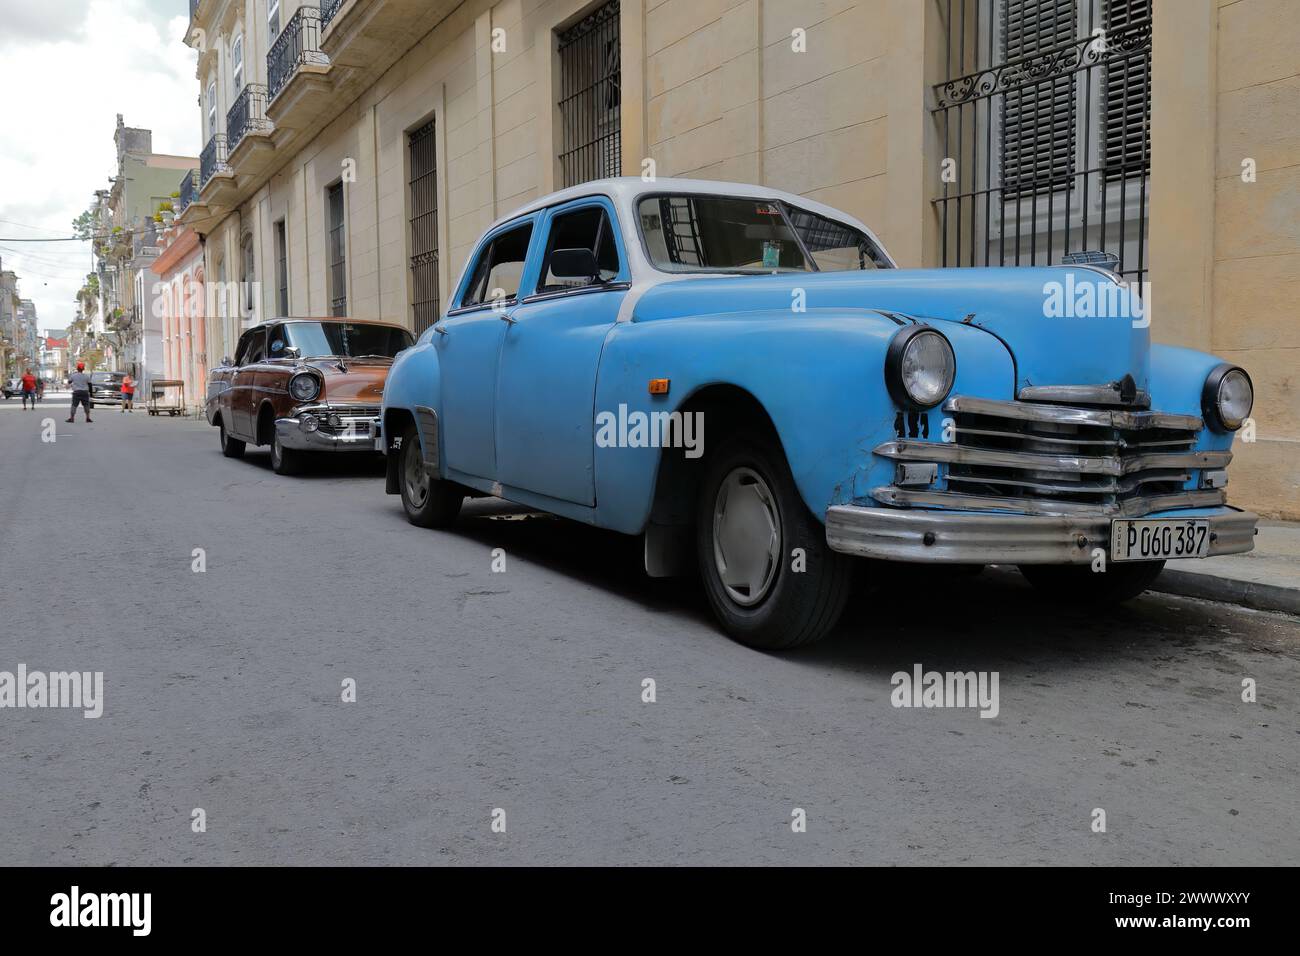 106 Blue Plymouth Special DeLuxe 1949, Chevrolet Bel Air 1957, American hard-top sedan 4-door classic cars parked on a street of Centro Havana-Cuba. Stock Photo